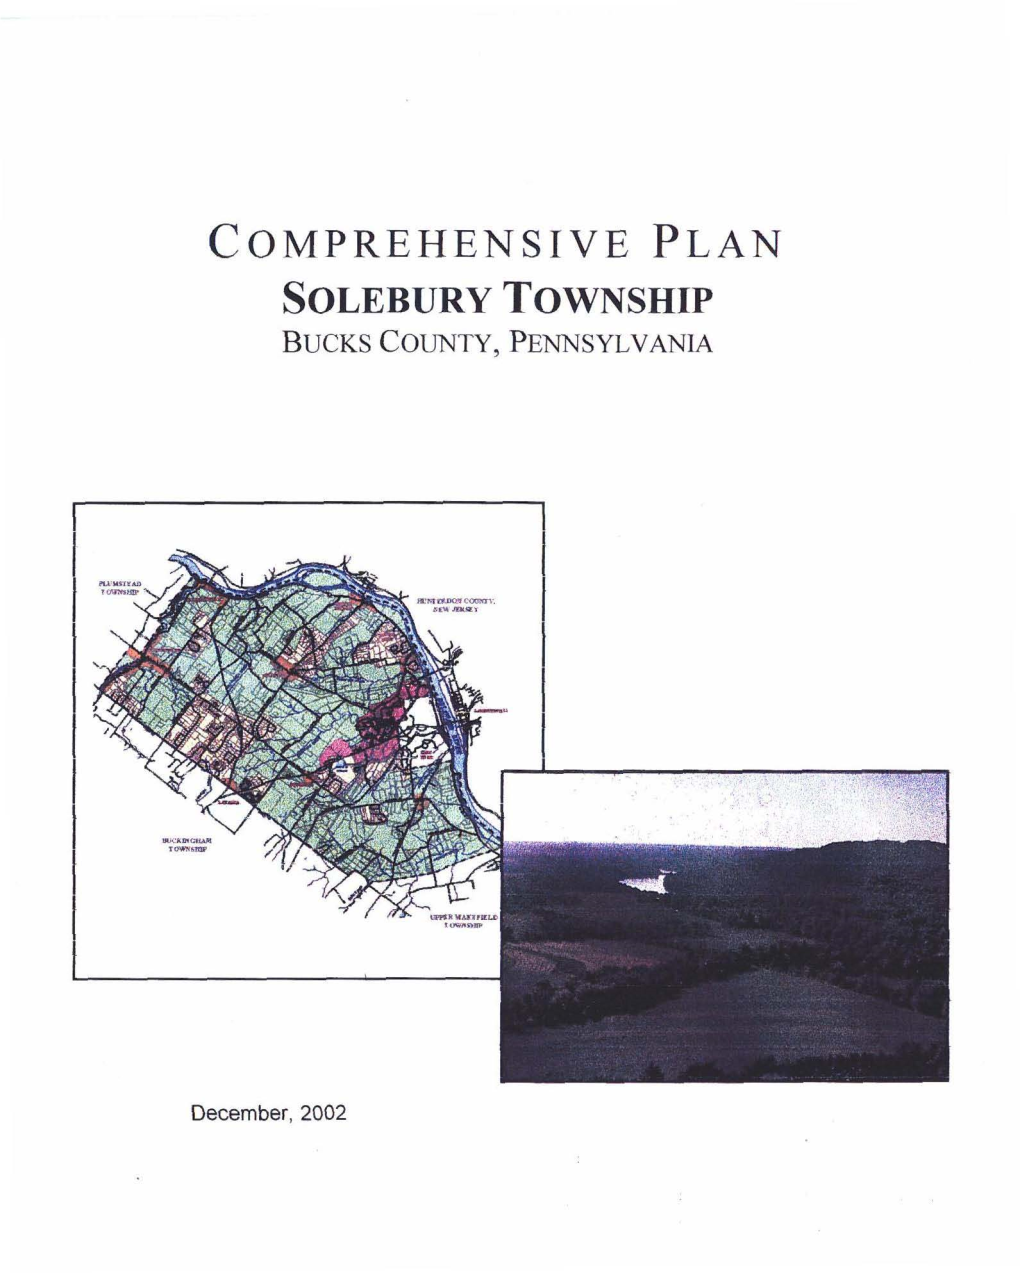 Solebury Township Comprehensive Planning Committee